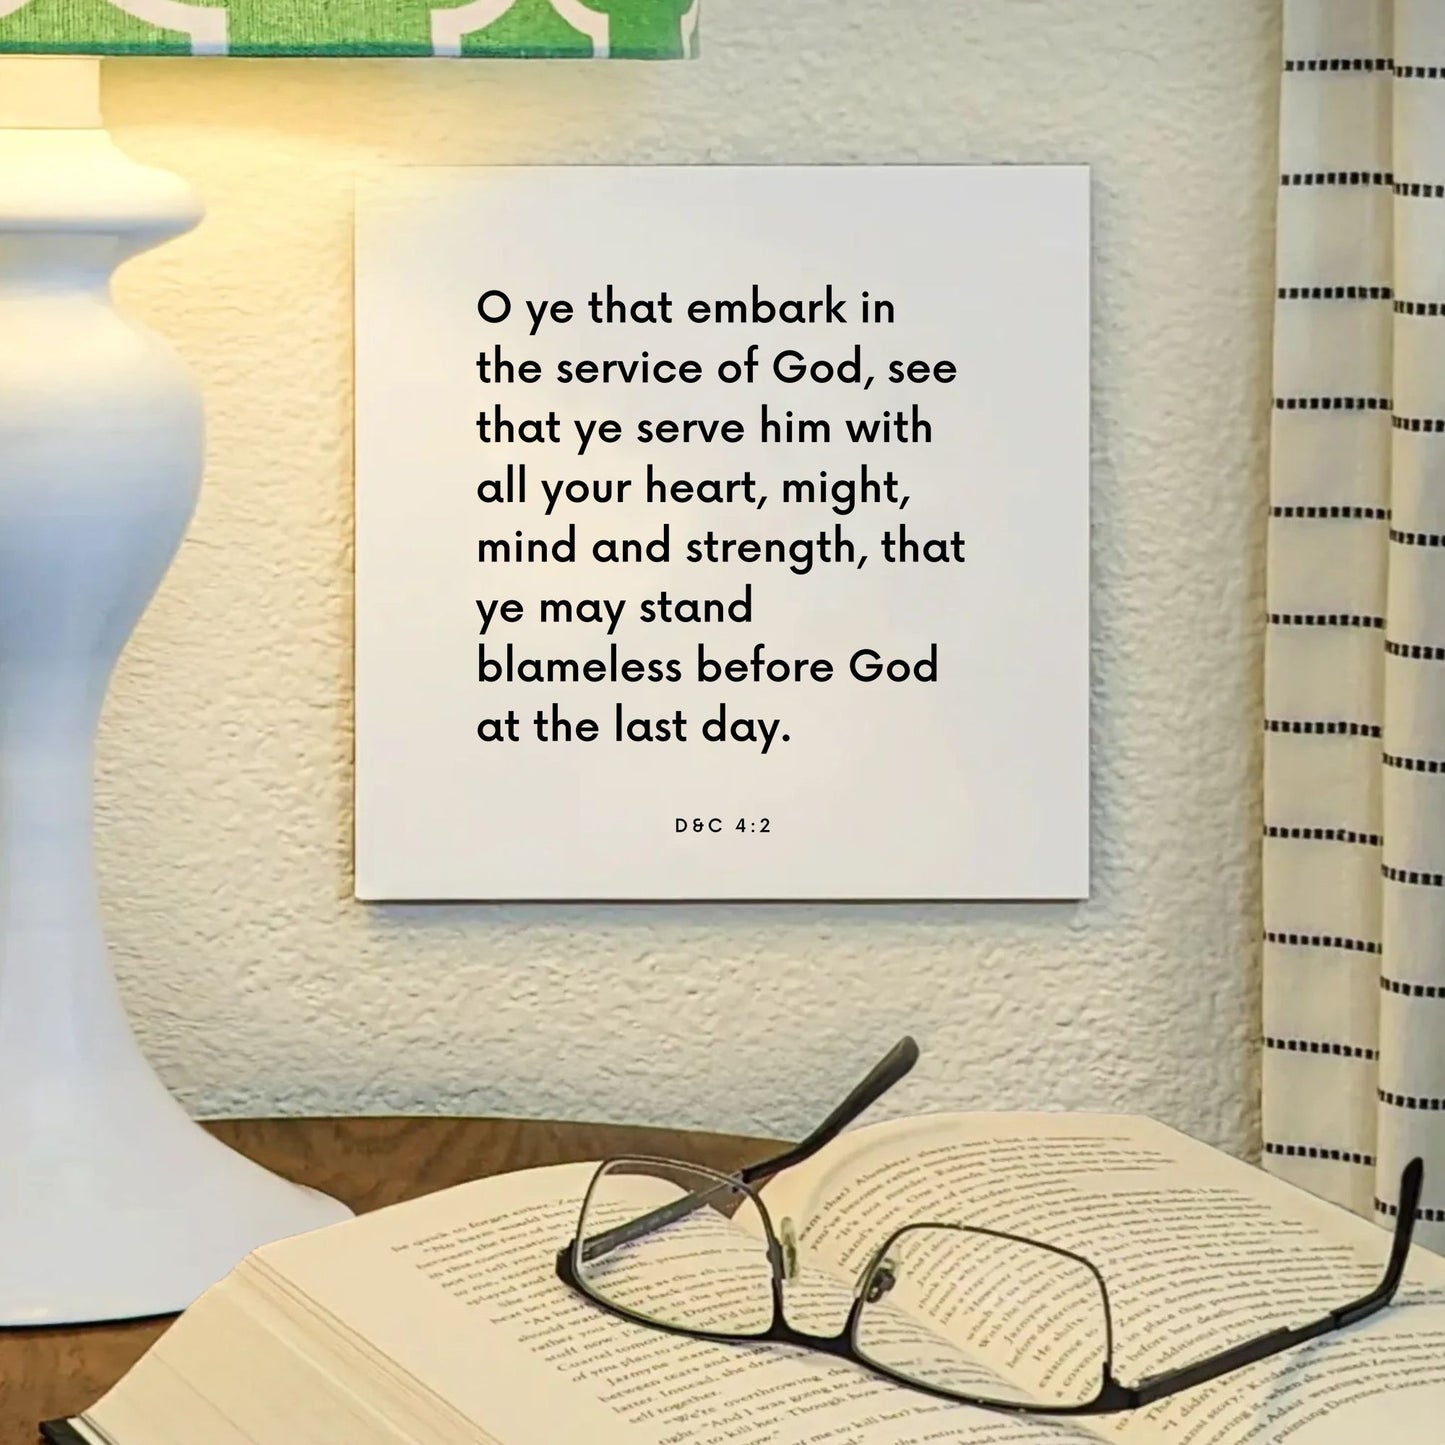 Lamp mouting of the scripture tile for D&C 4:2 - "O ye that embark in the service of God"